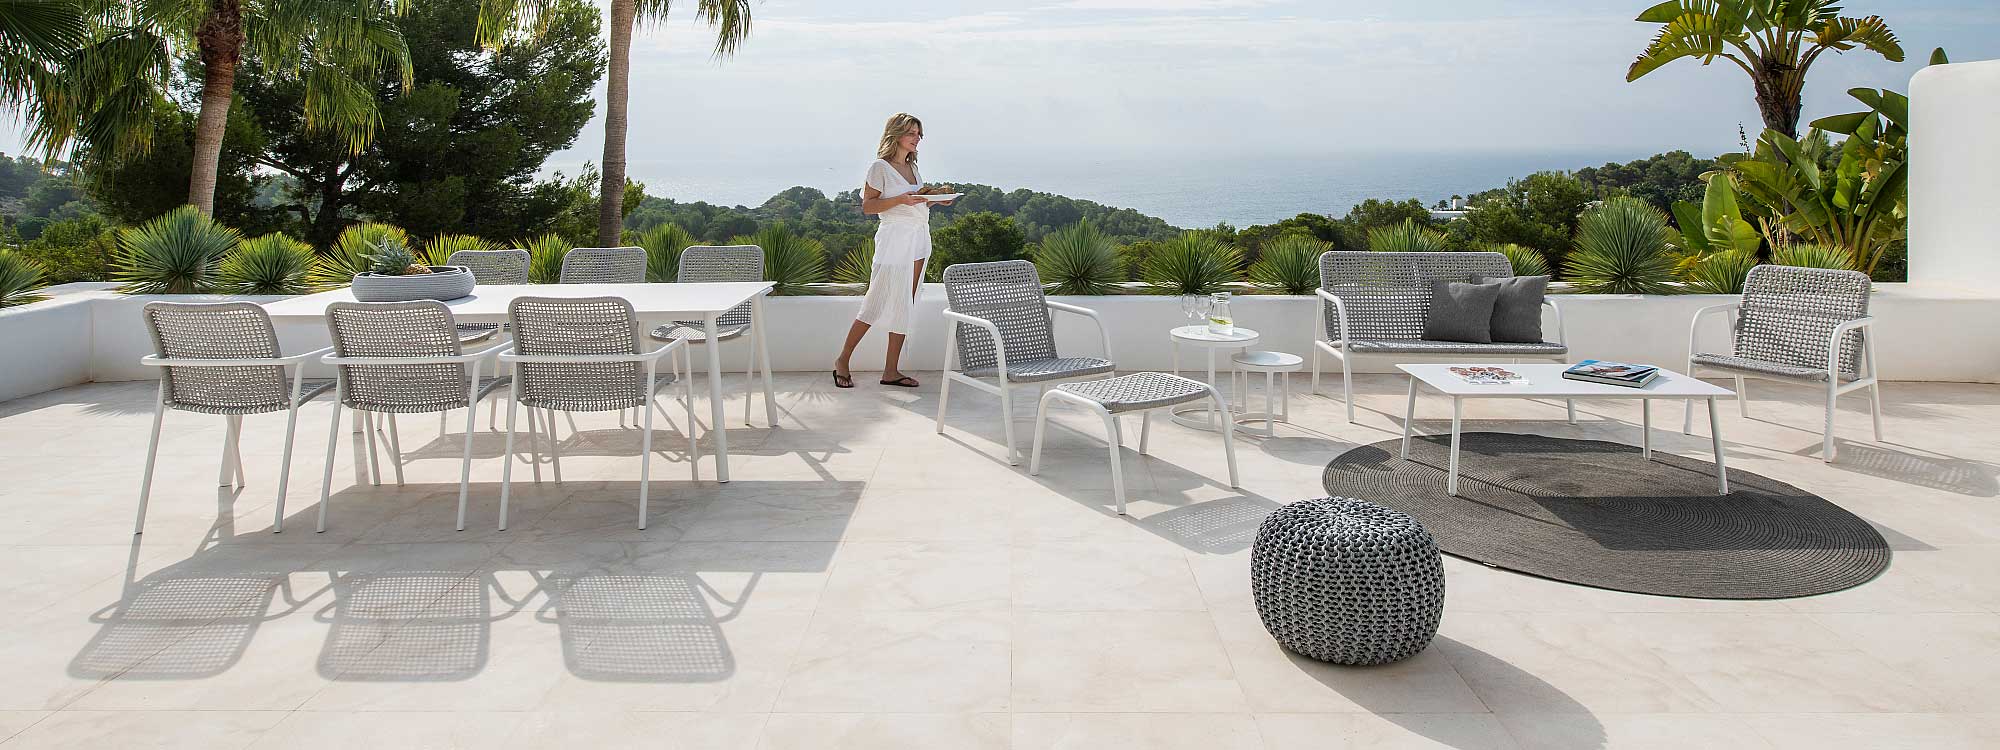 Image of woman stood holding a bowl of fruit in amongst Durham contemporary outdoor furniture, shown in sunny terrace